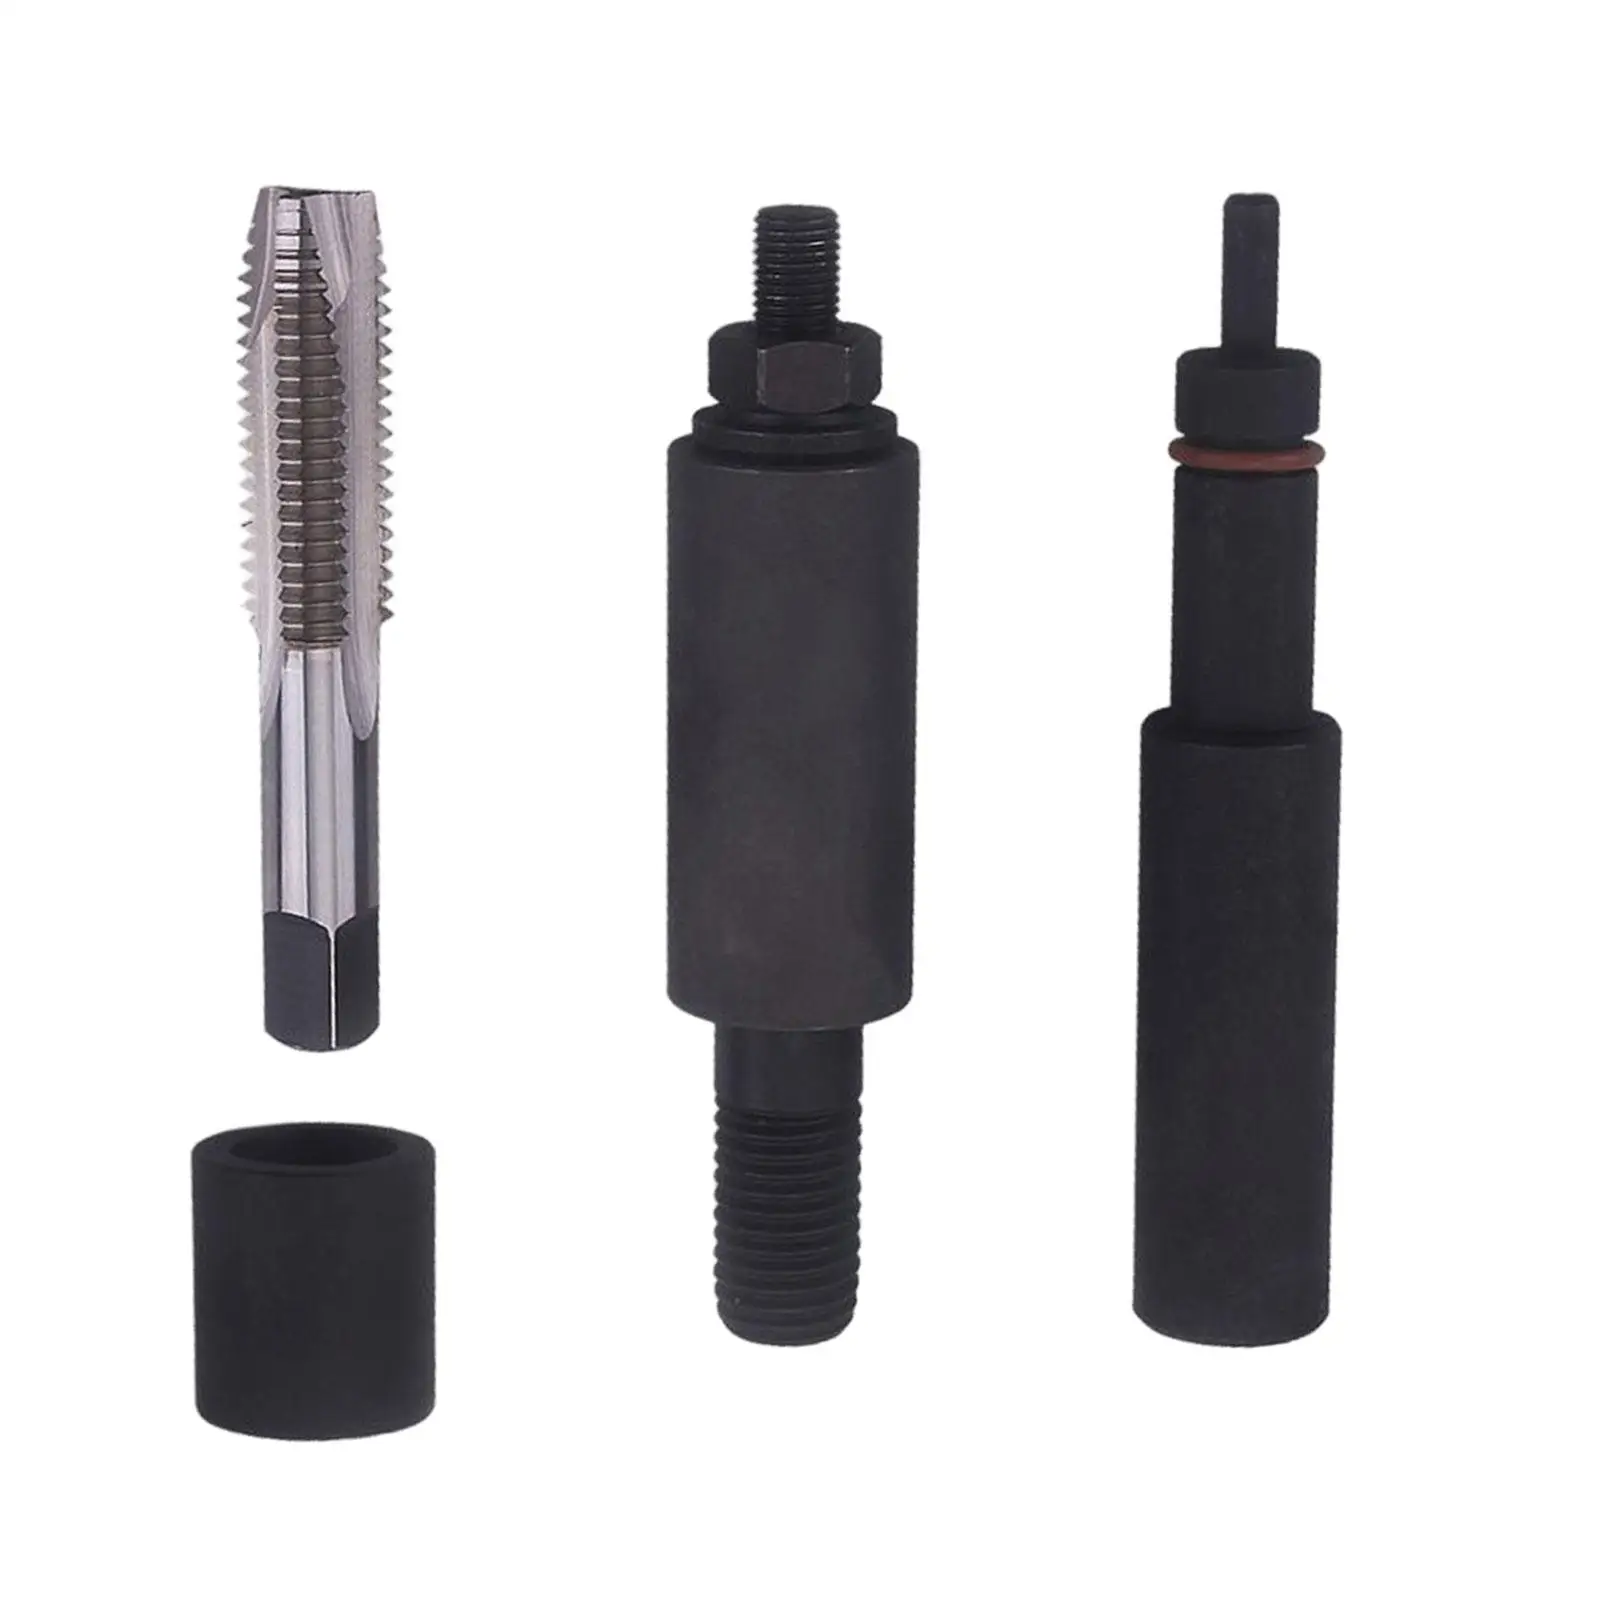 Fuel Injector Sleeve Cup Remove and Install Tool Set High Performance Automotive Repair Tool for Ford 6.0L 6.4L Powerstroke